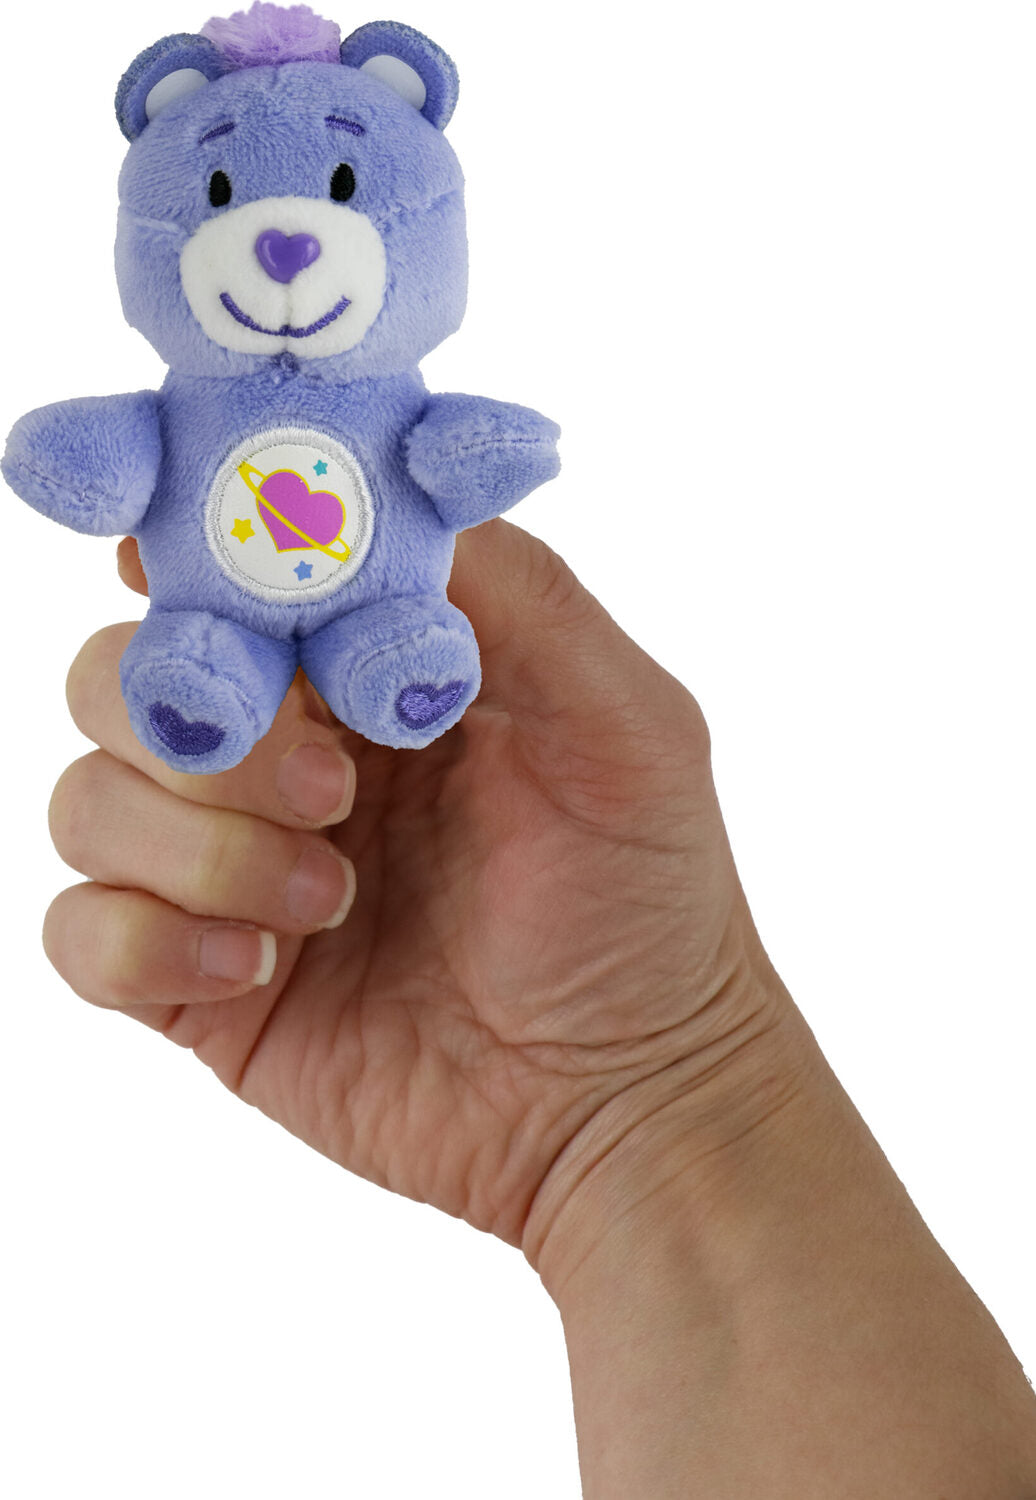 World's Smallest Care Bears, Series 4